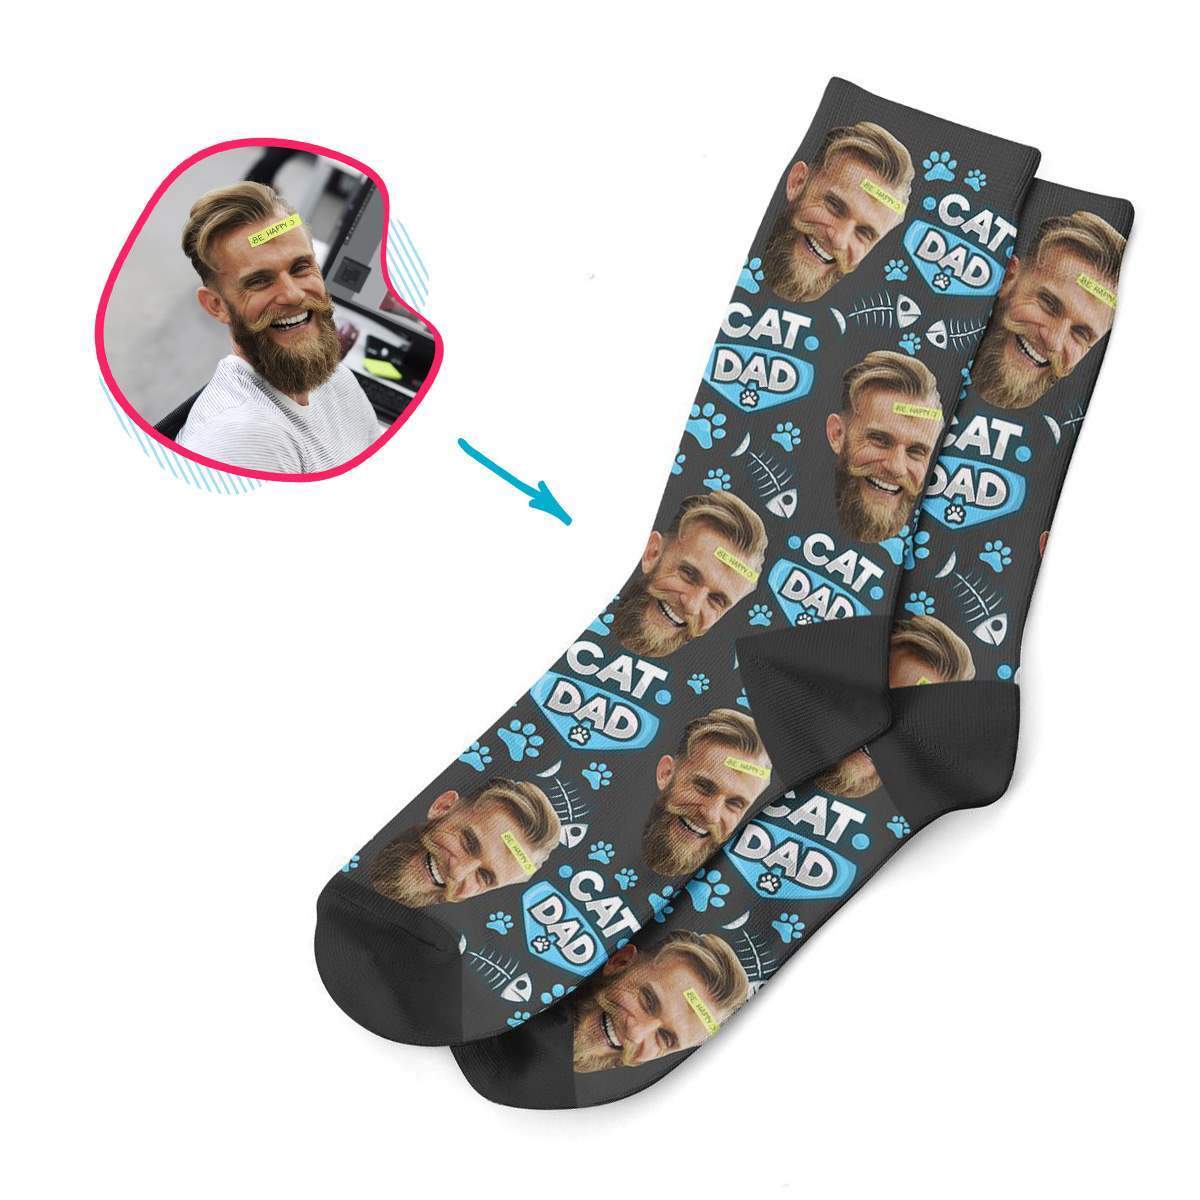 dark Cat Dad socks personalized with photo of face printed on them